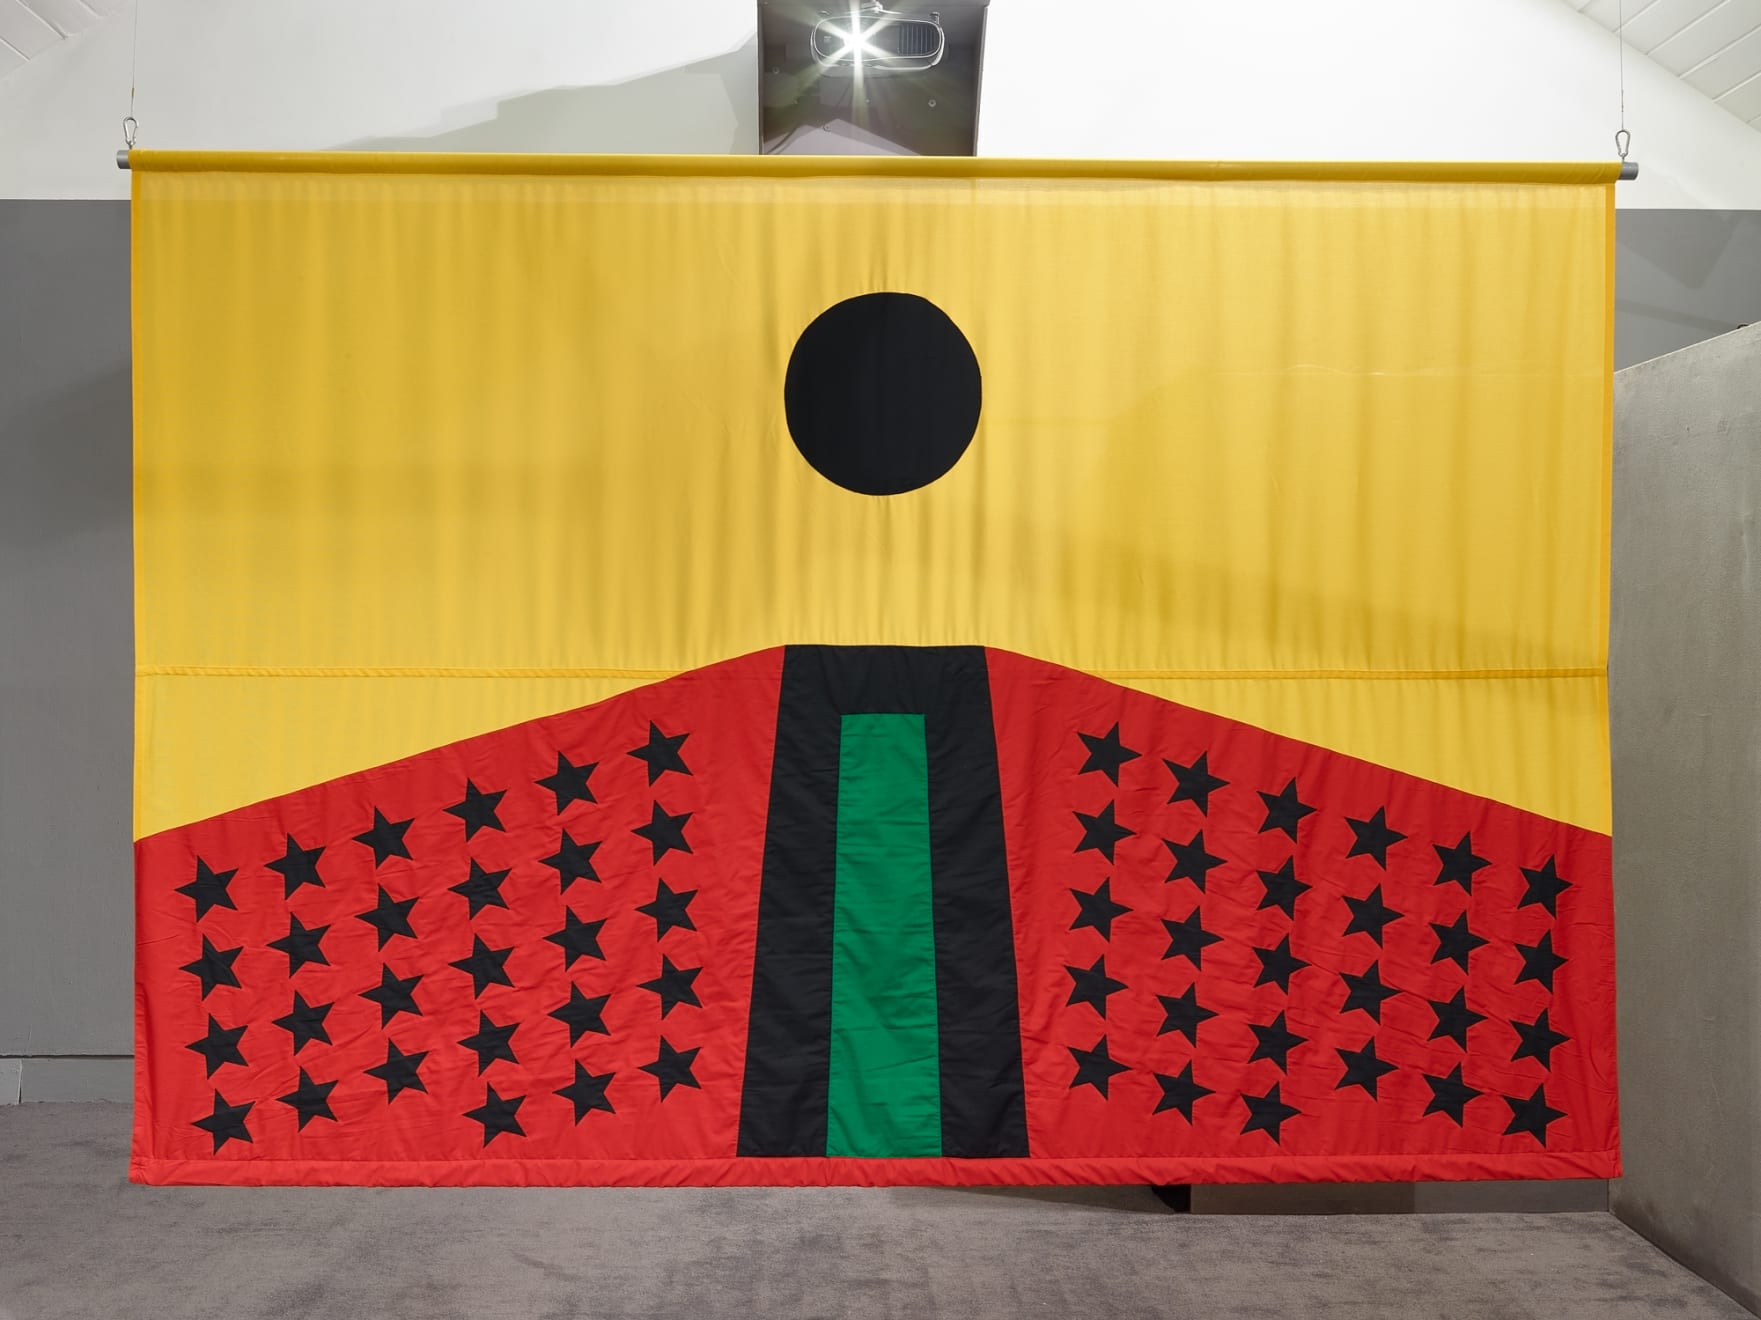 Larry Achiampong, PAN AFRICAN FLAG FOR THE RELIC TRAVELLERS’ ALLIANCE, 2017